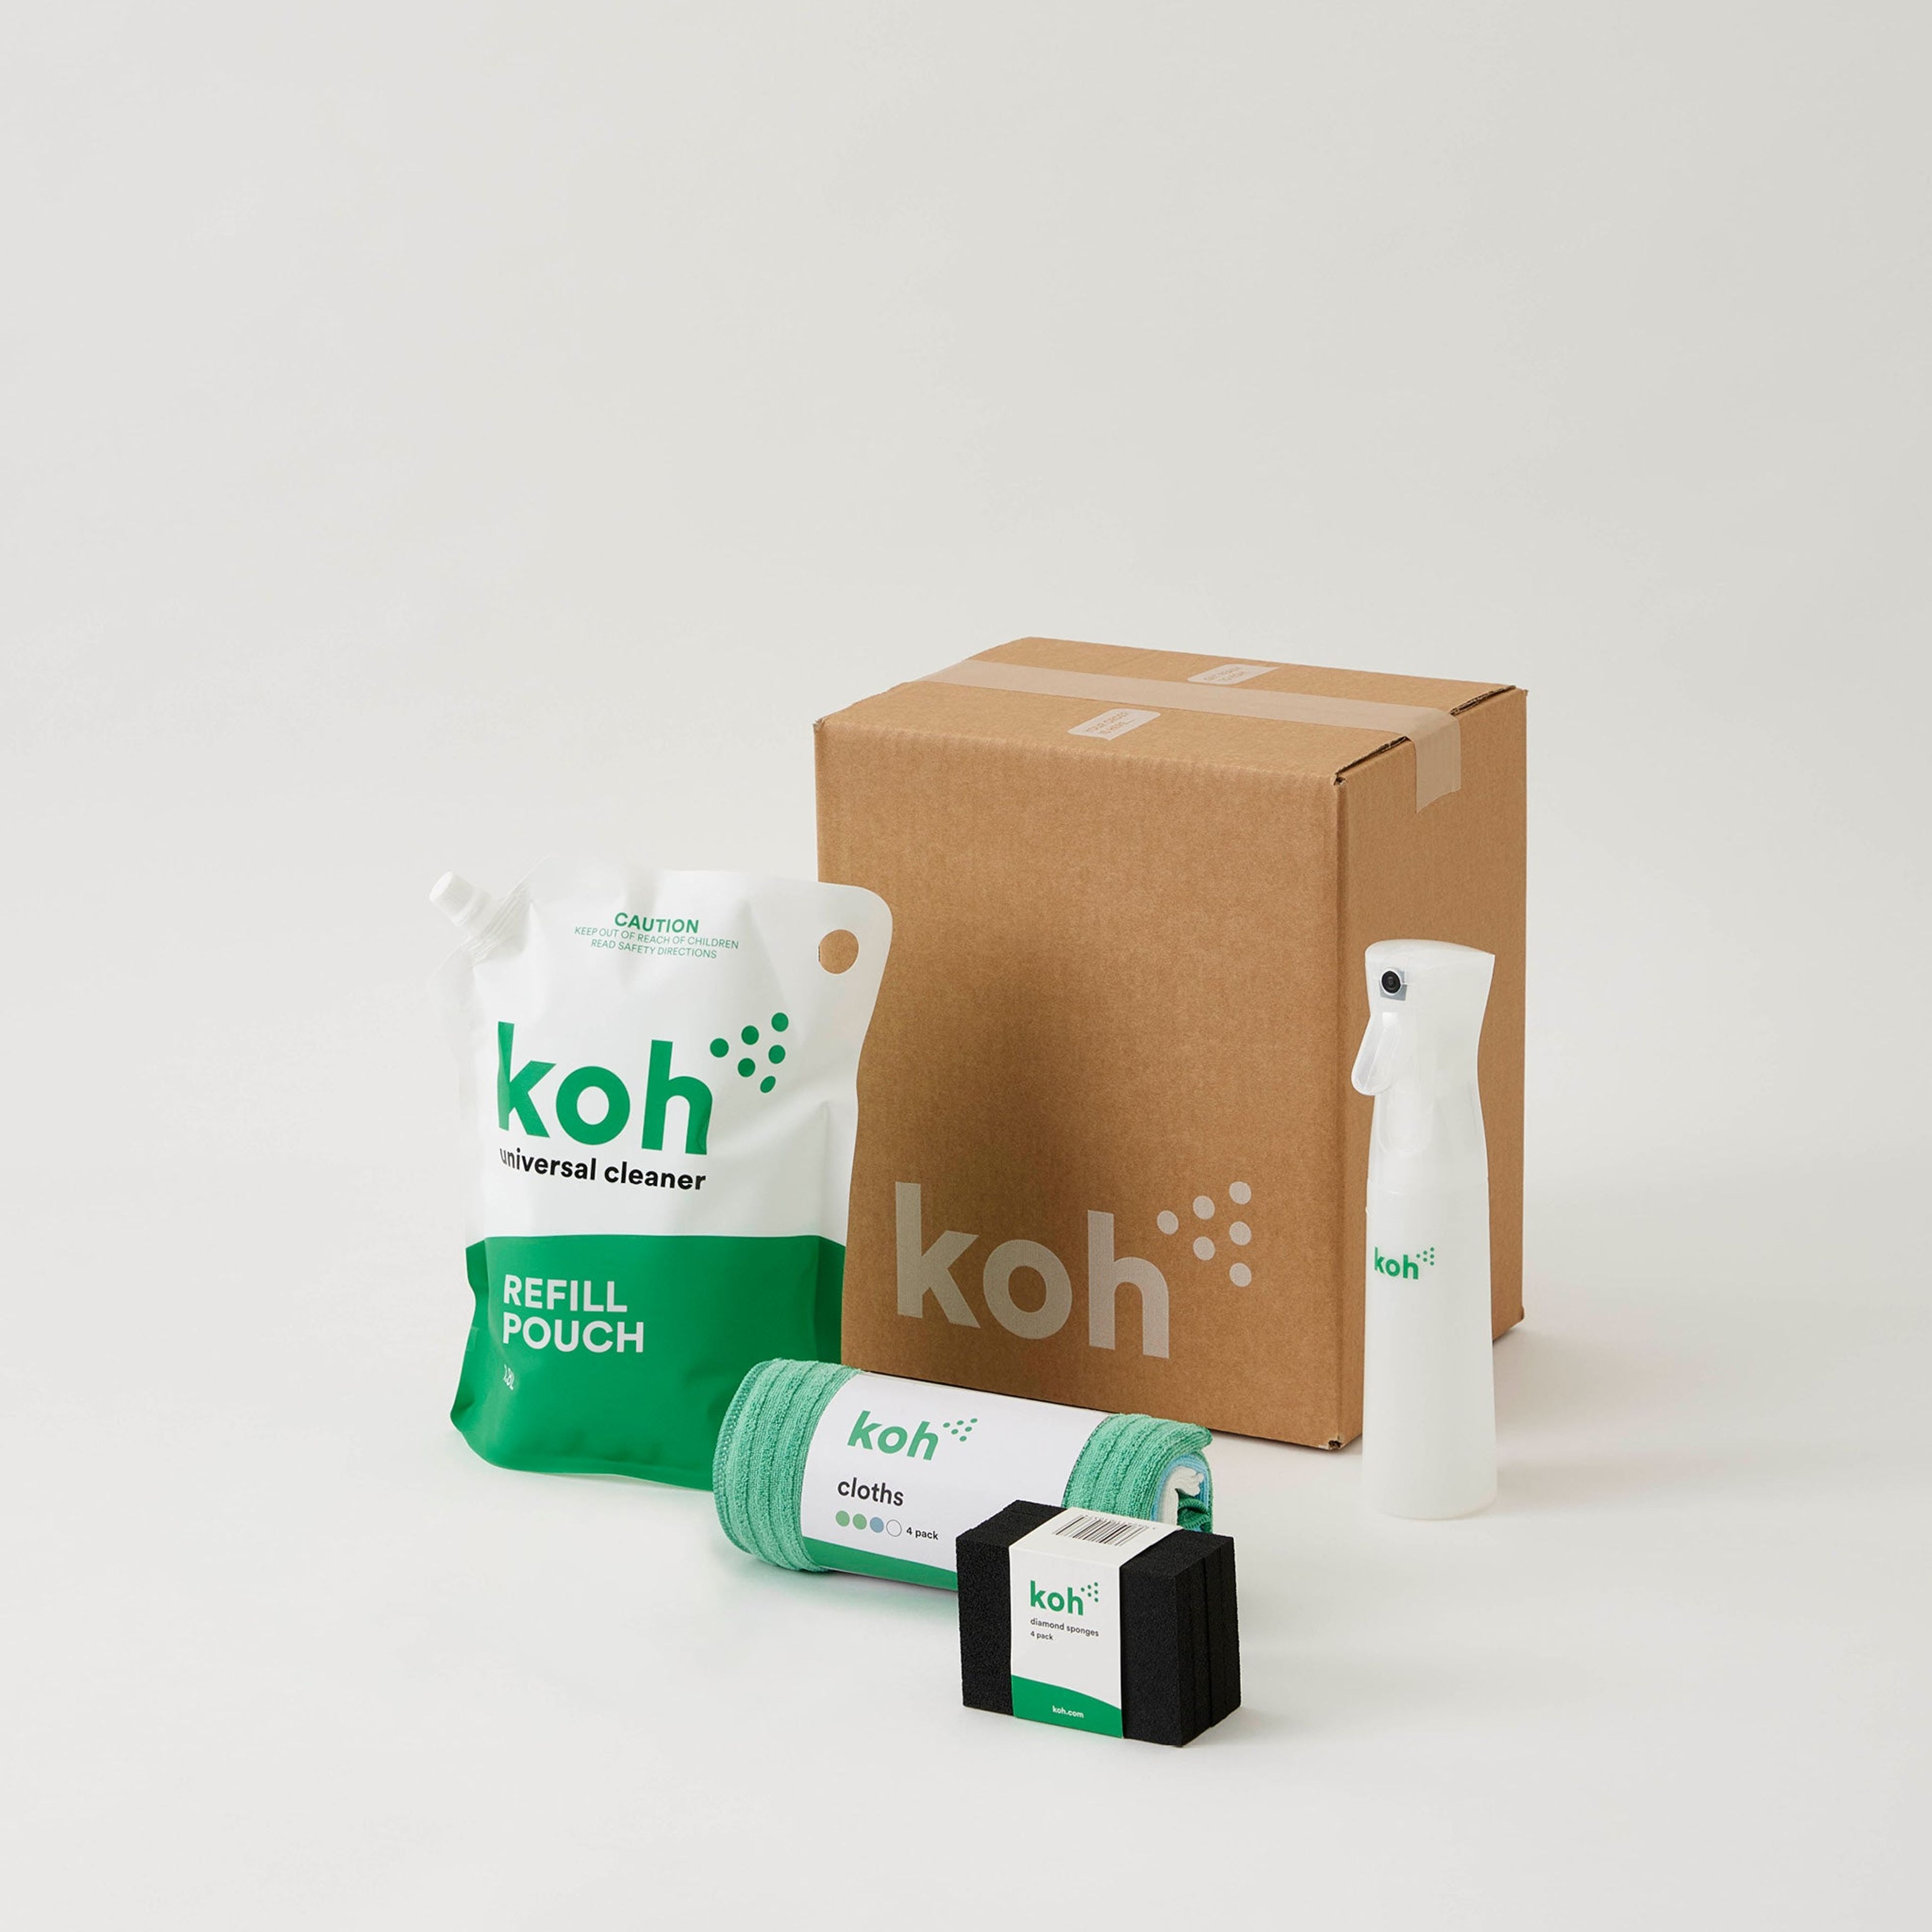 www.koh.com/products/surface-starter-kit